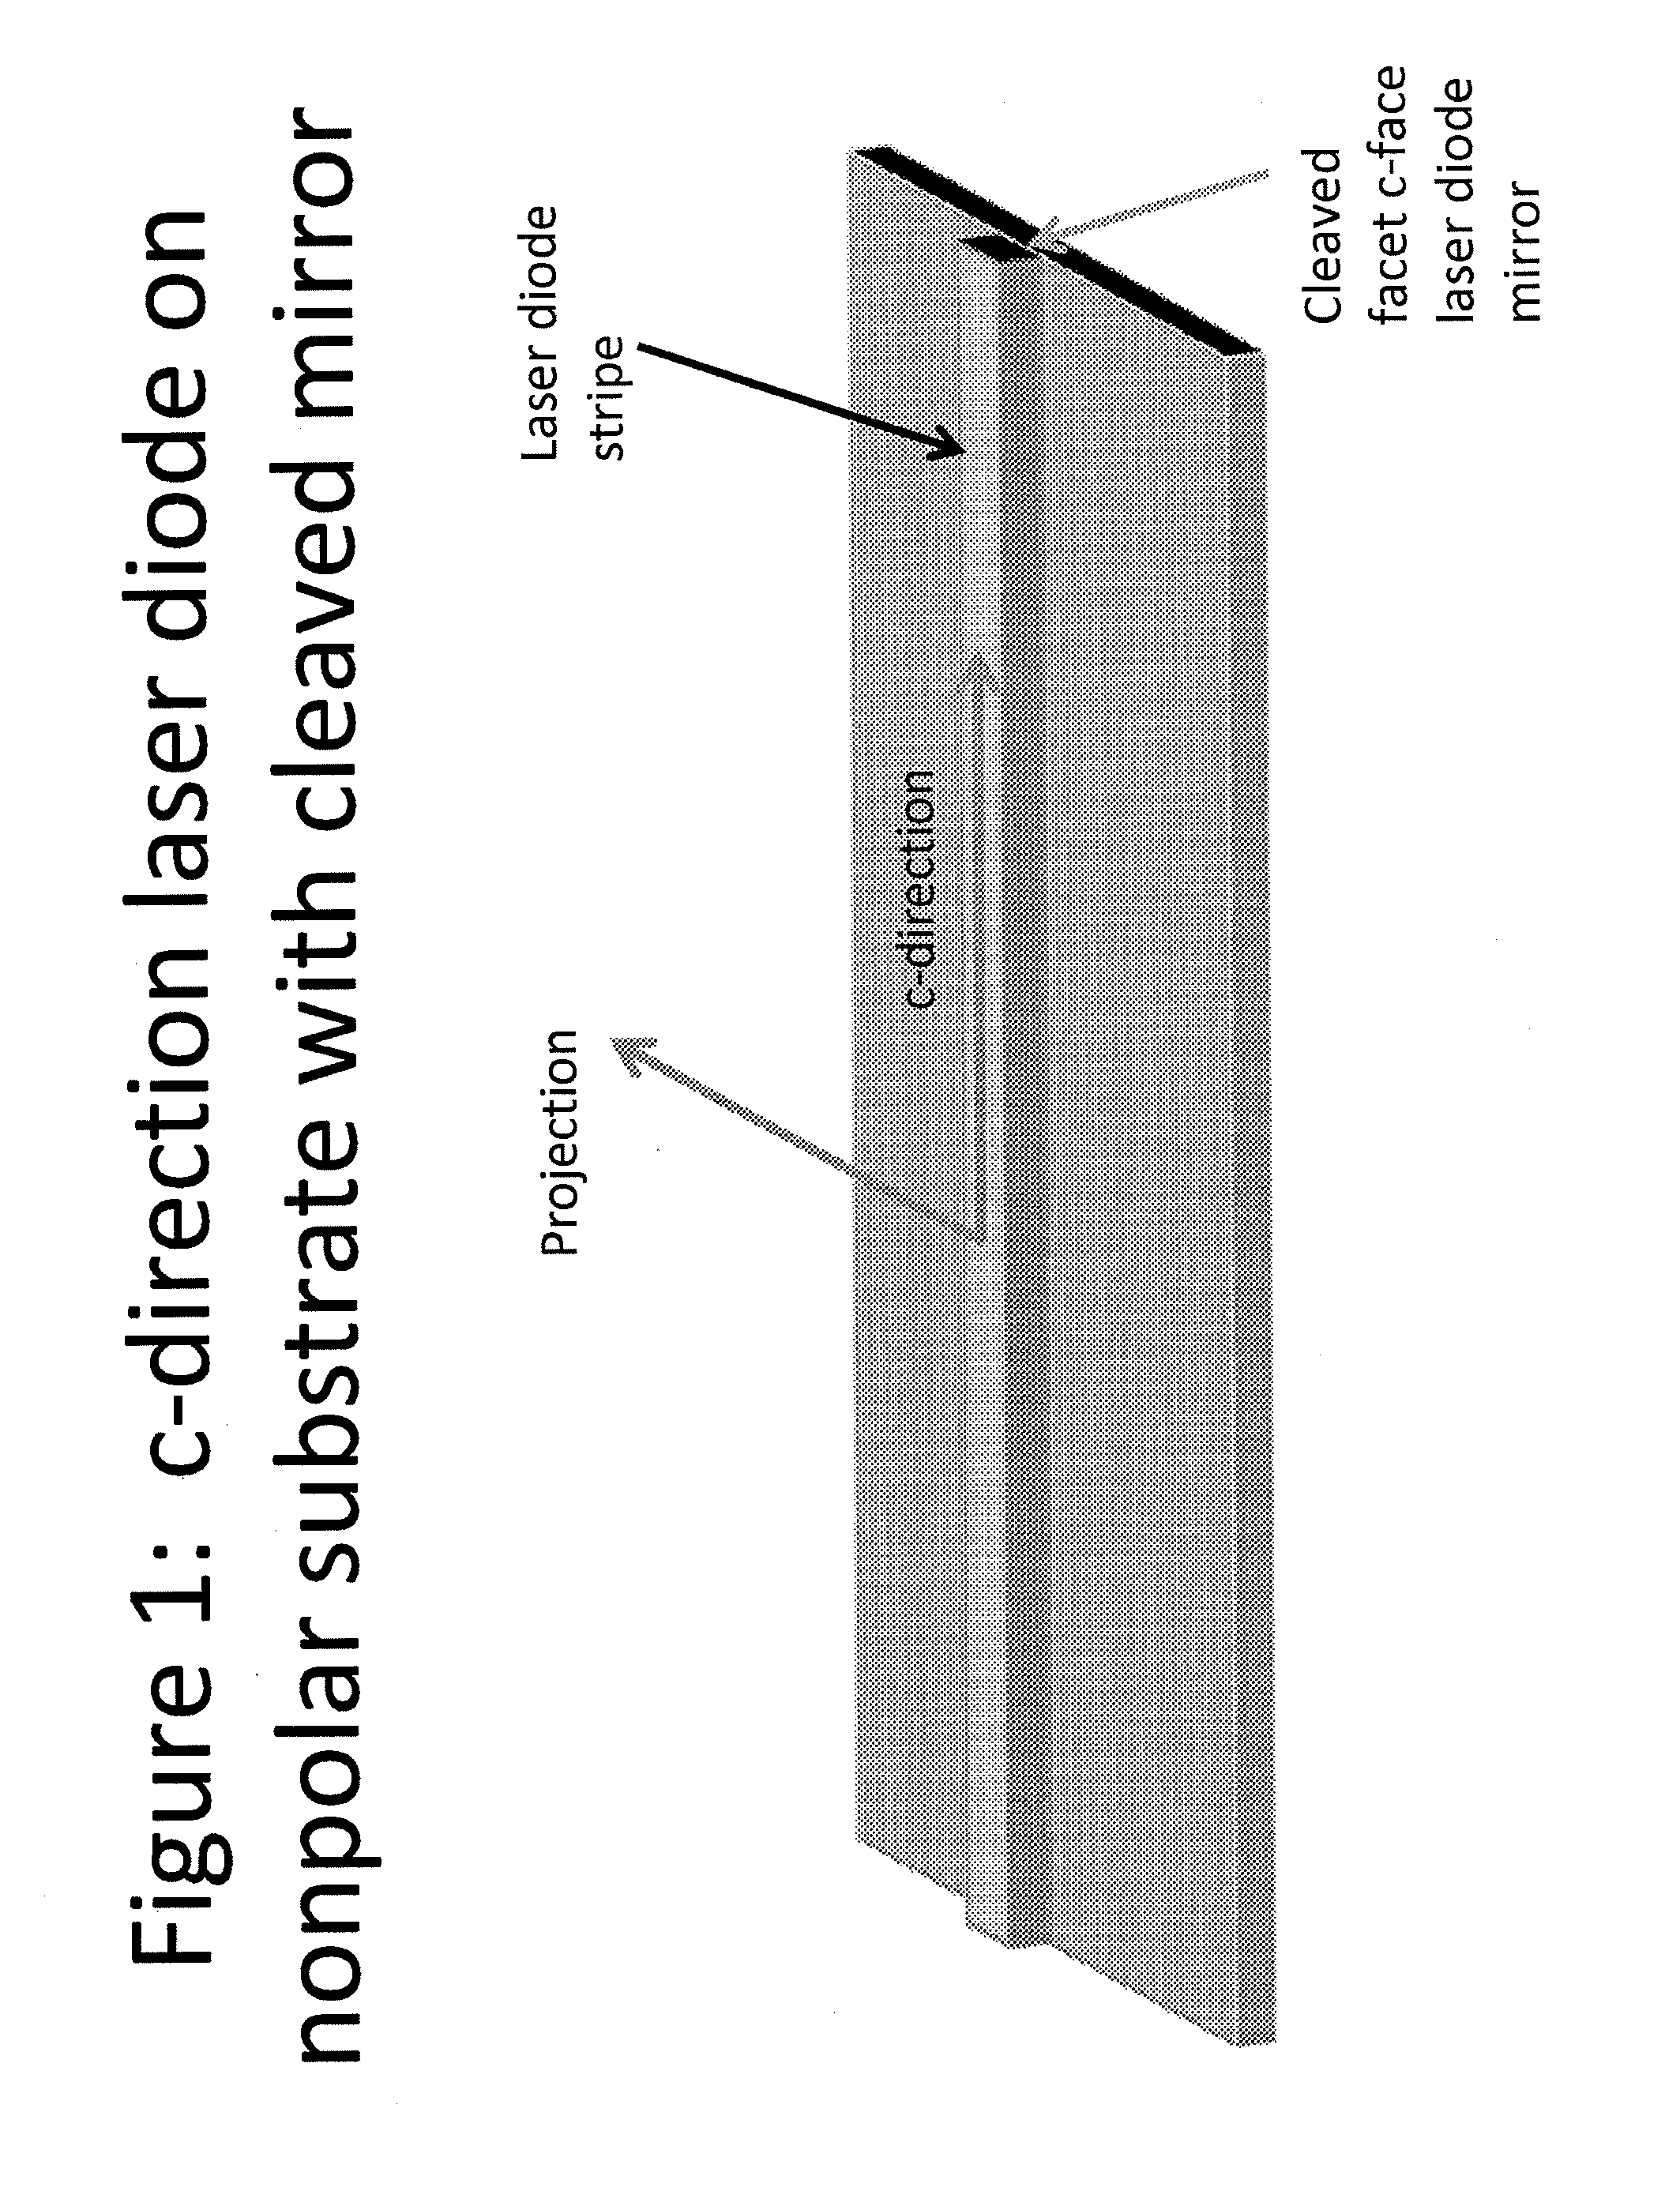 Method of Fabricating Optical Devices Using Laser Treatment of Contact Regions of Gallium and Nitrogen Containing Material